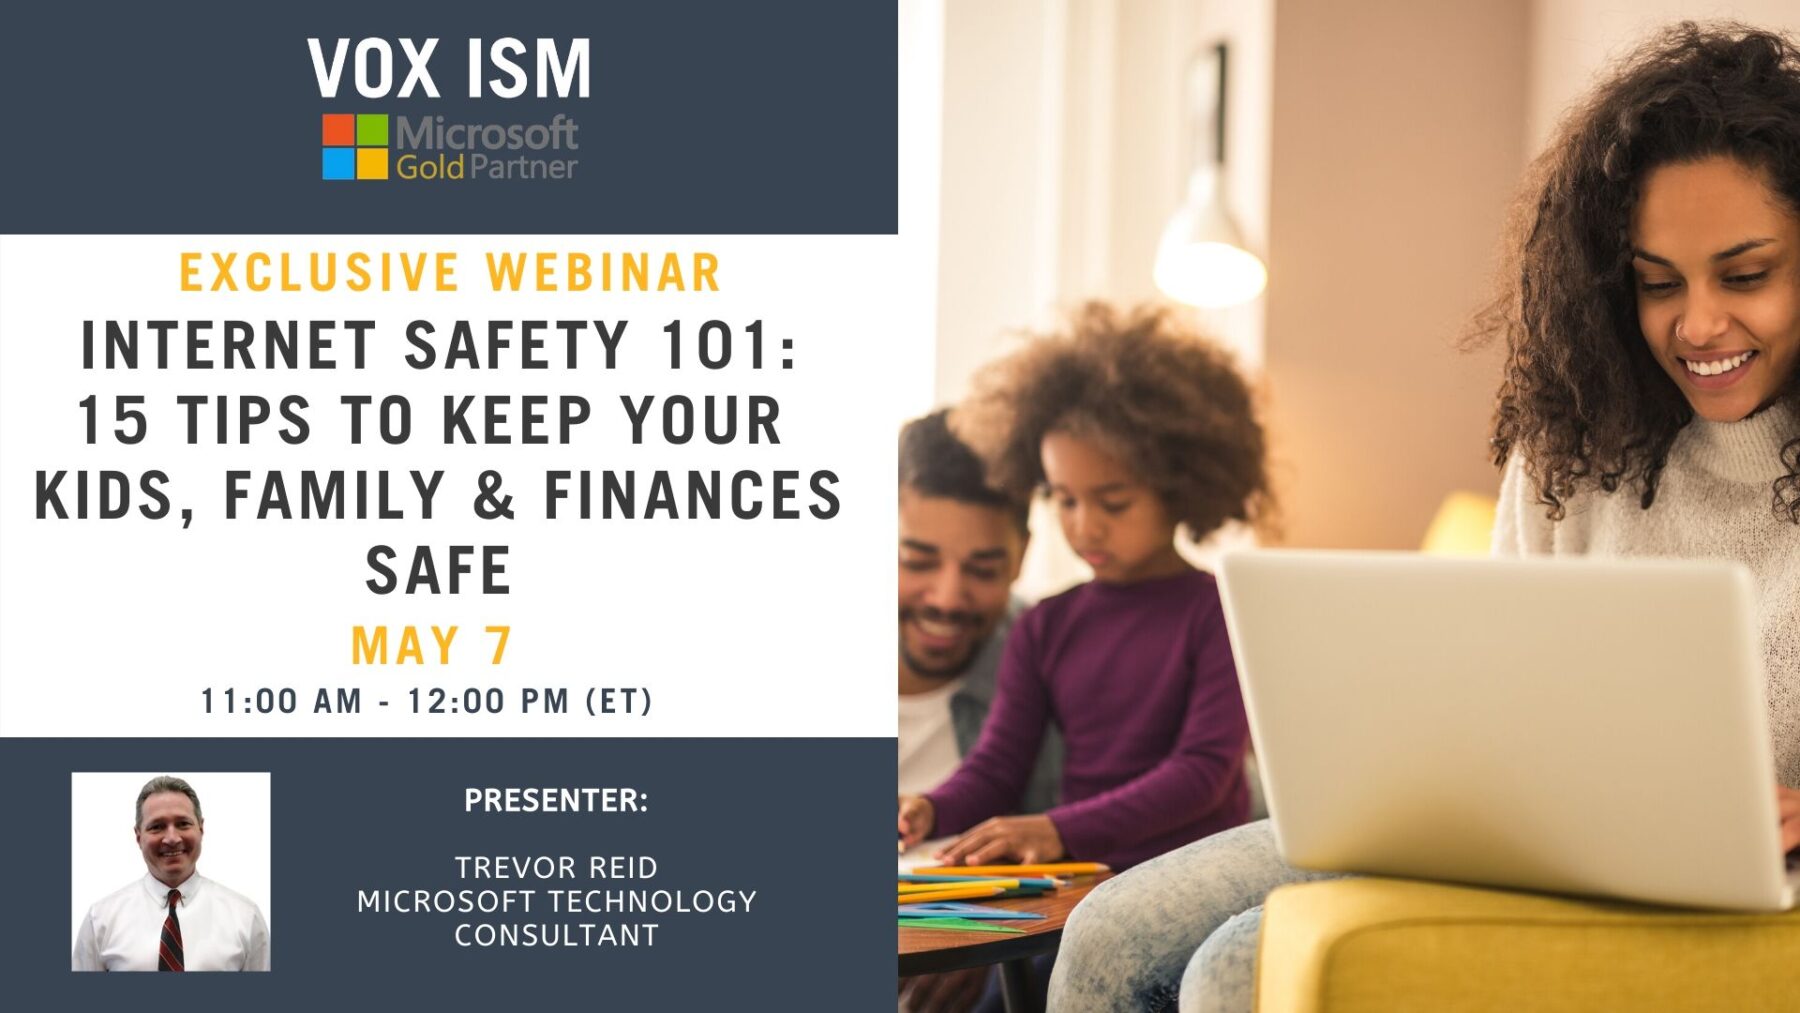 Internet Safety 101: 15 Tips to Keep your Kids, Family & Finances Safe - May 7 - Webinar VOX ISM